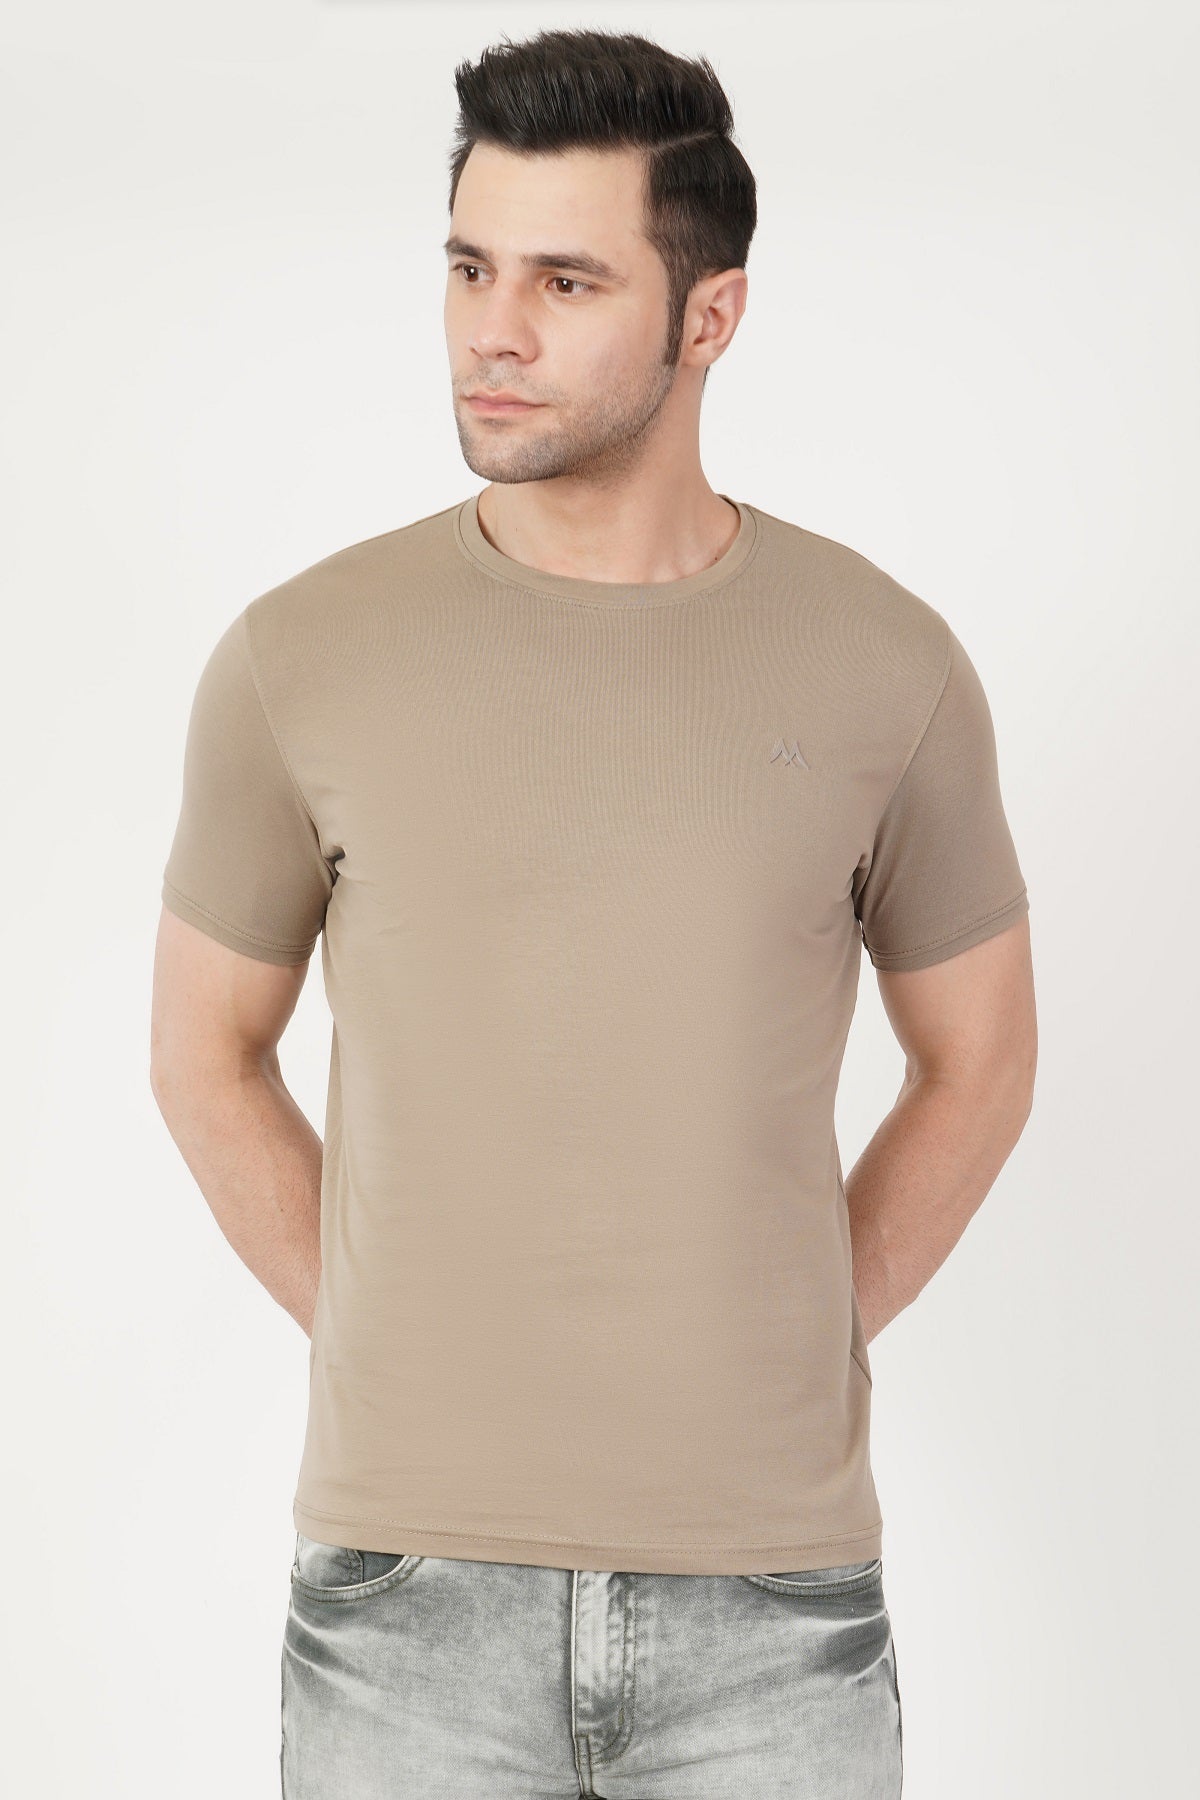 Solid Men Round Neck Trutle Shell T-Shirt